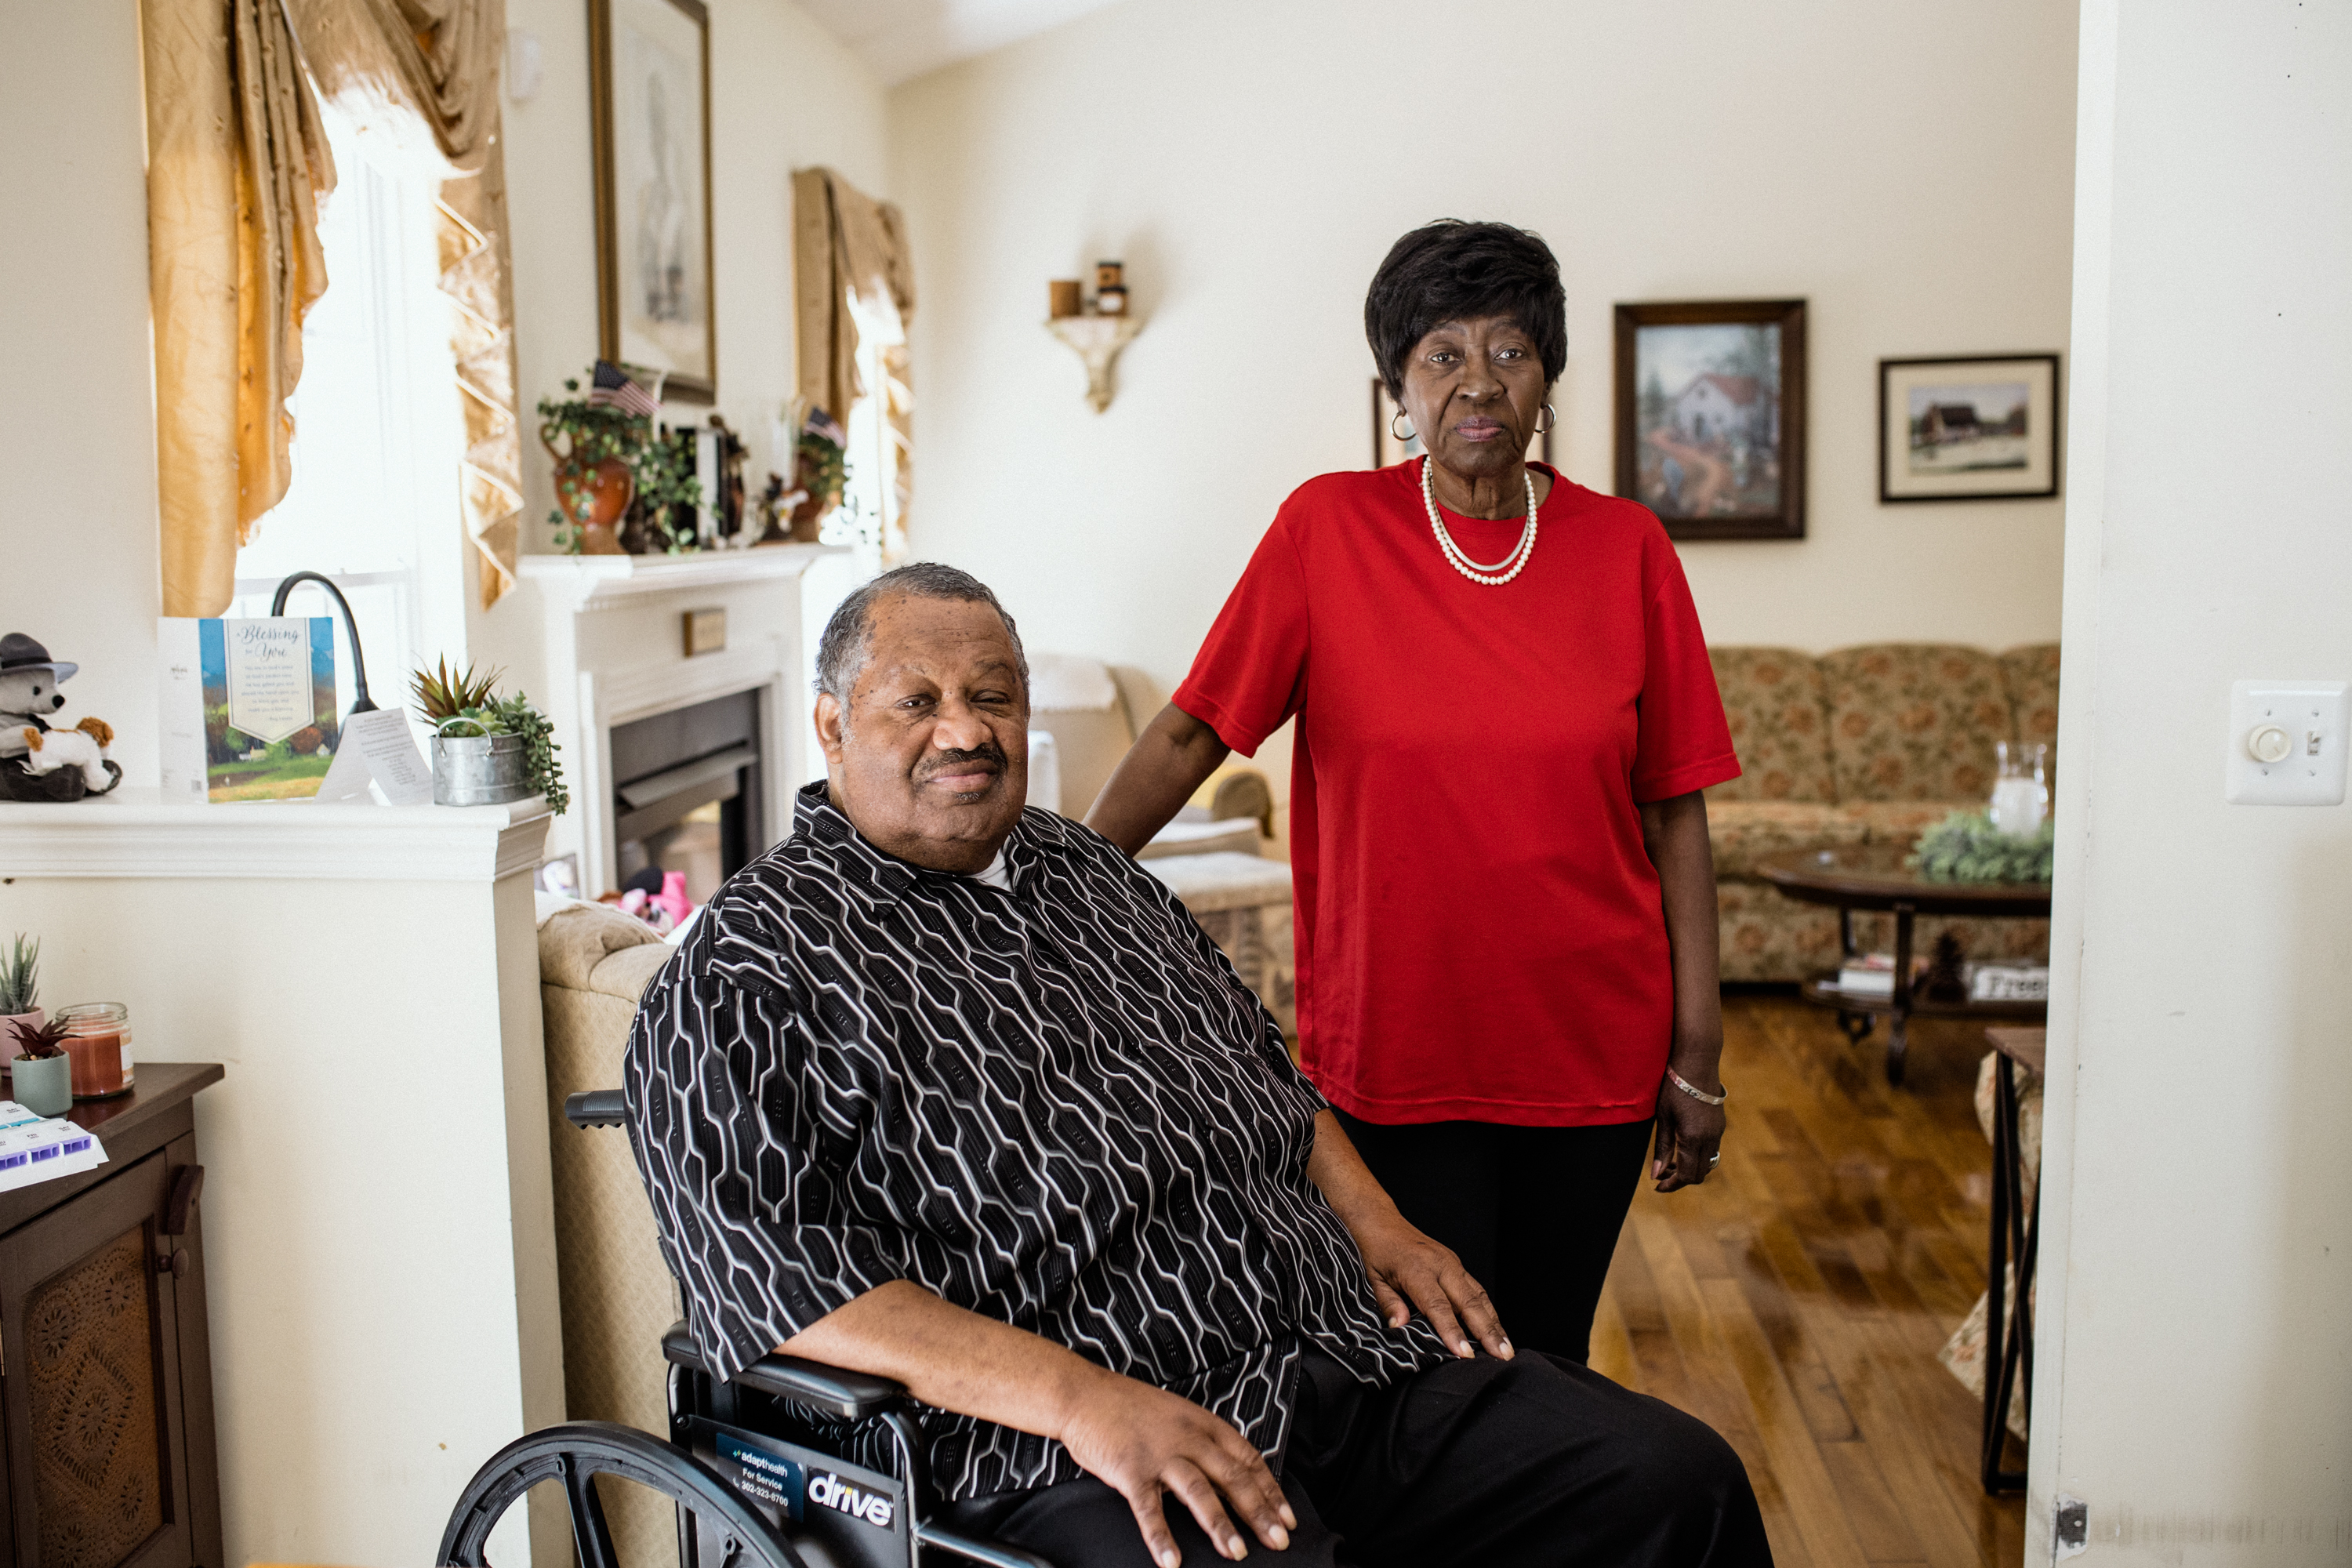 Thomas Greene is seated in a wheelchair with his wife standing beside him, her hand on his shoulder. Both subjects look towards the camera. They are in their home.